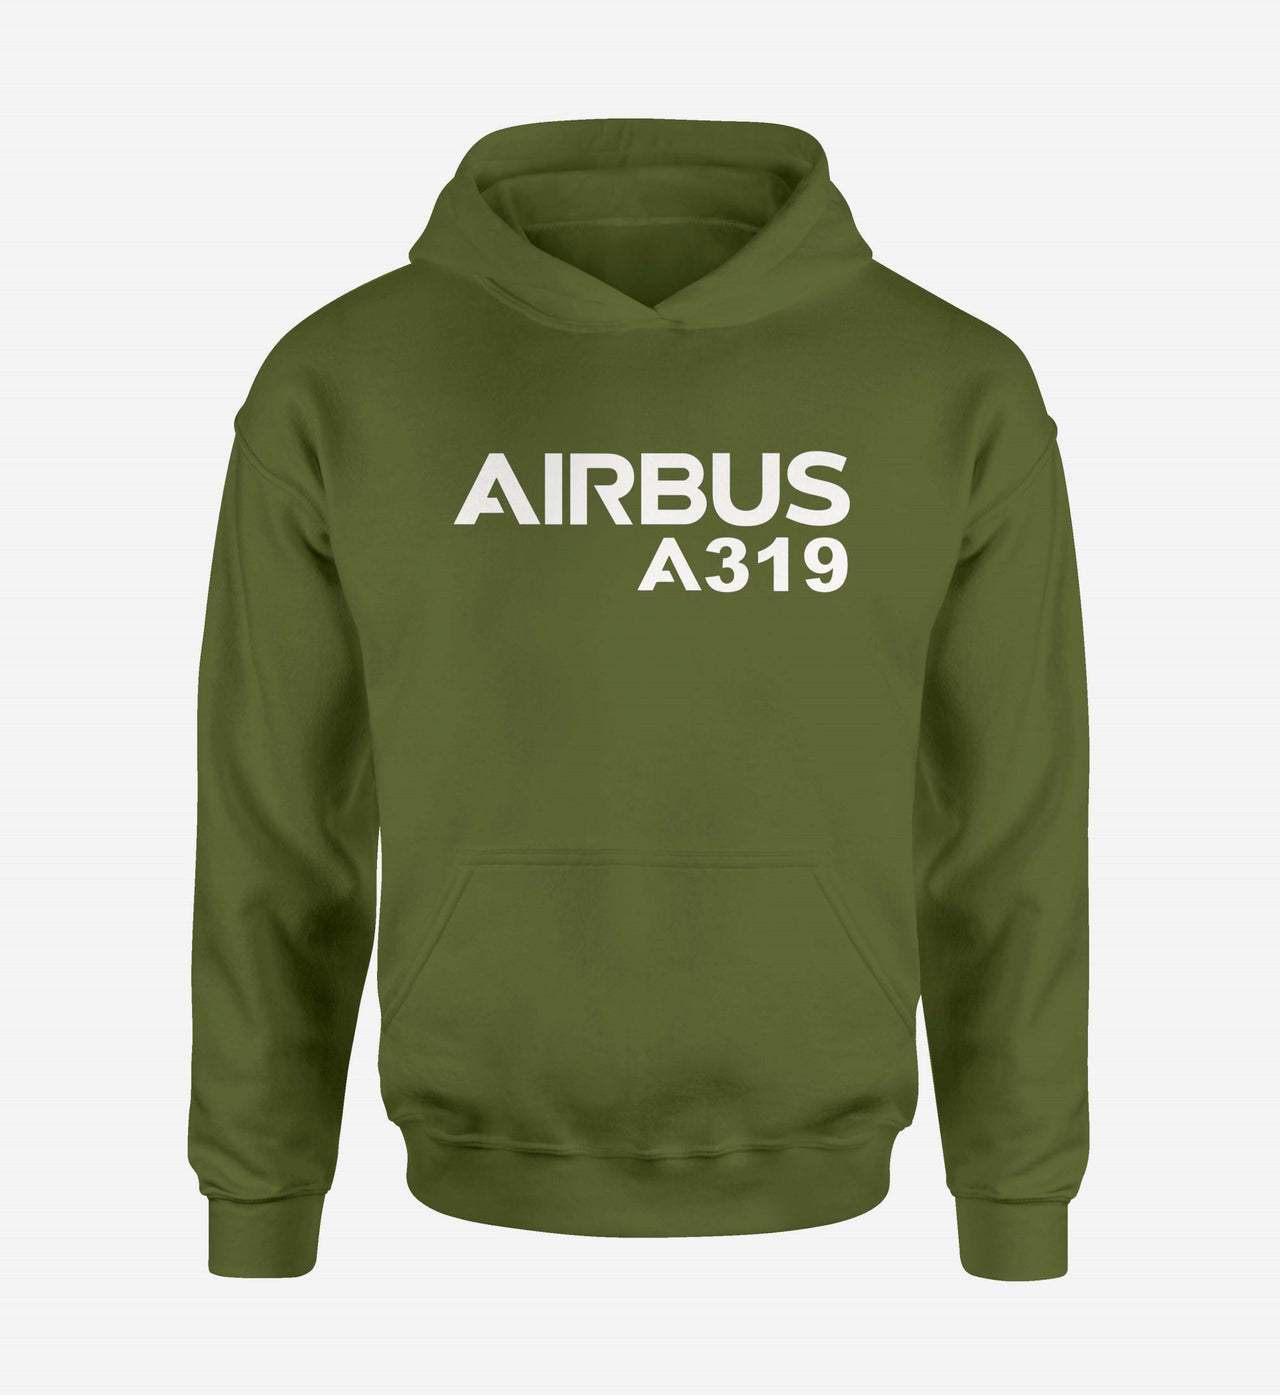 Airbus A319 & Text Designed Hoodies